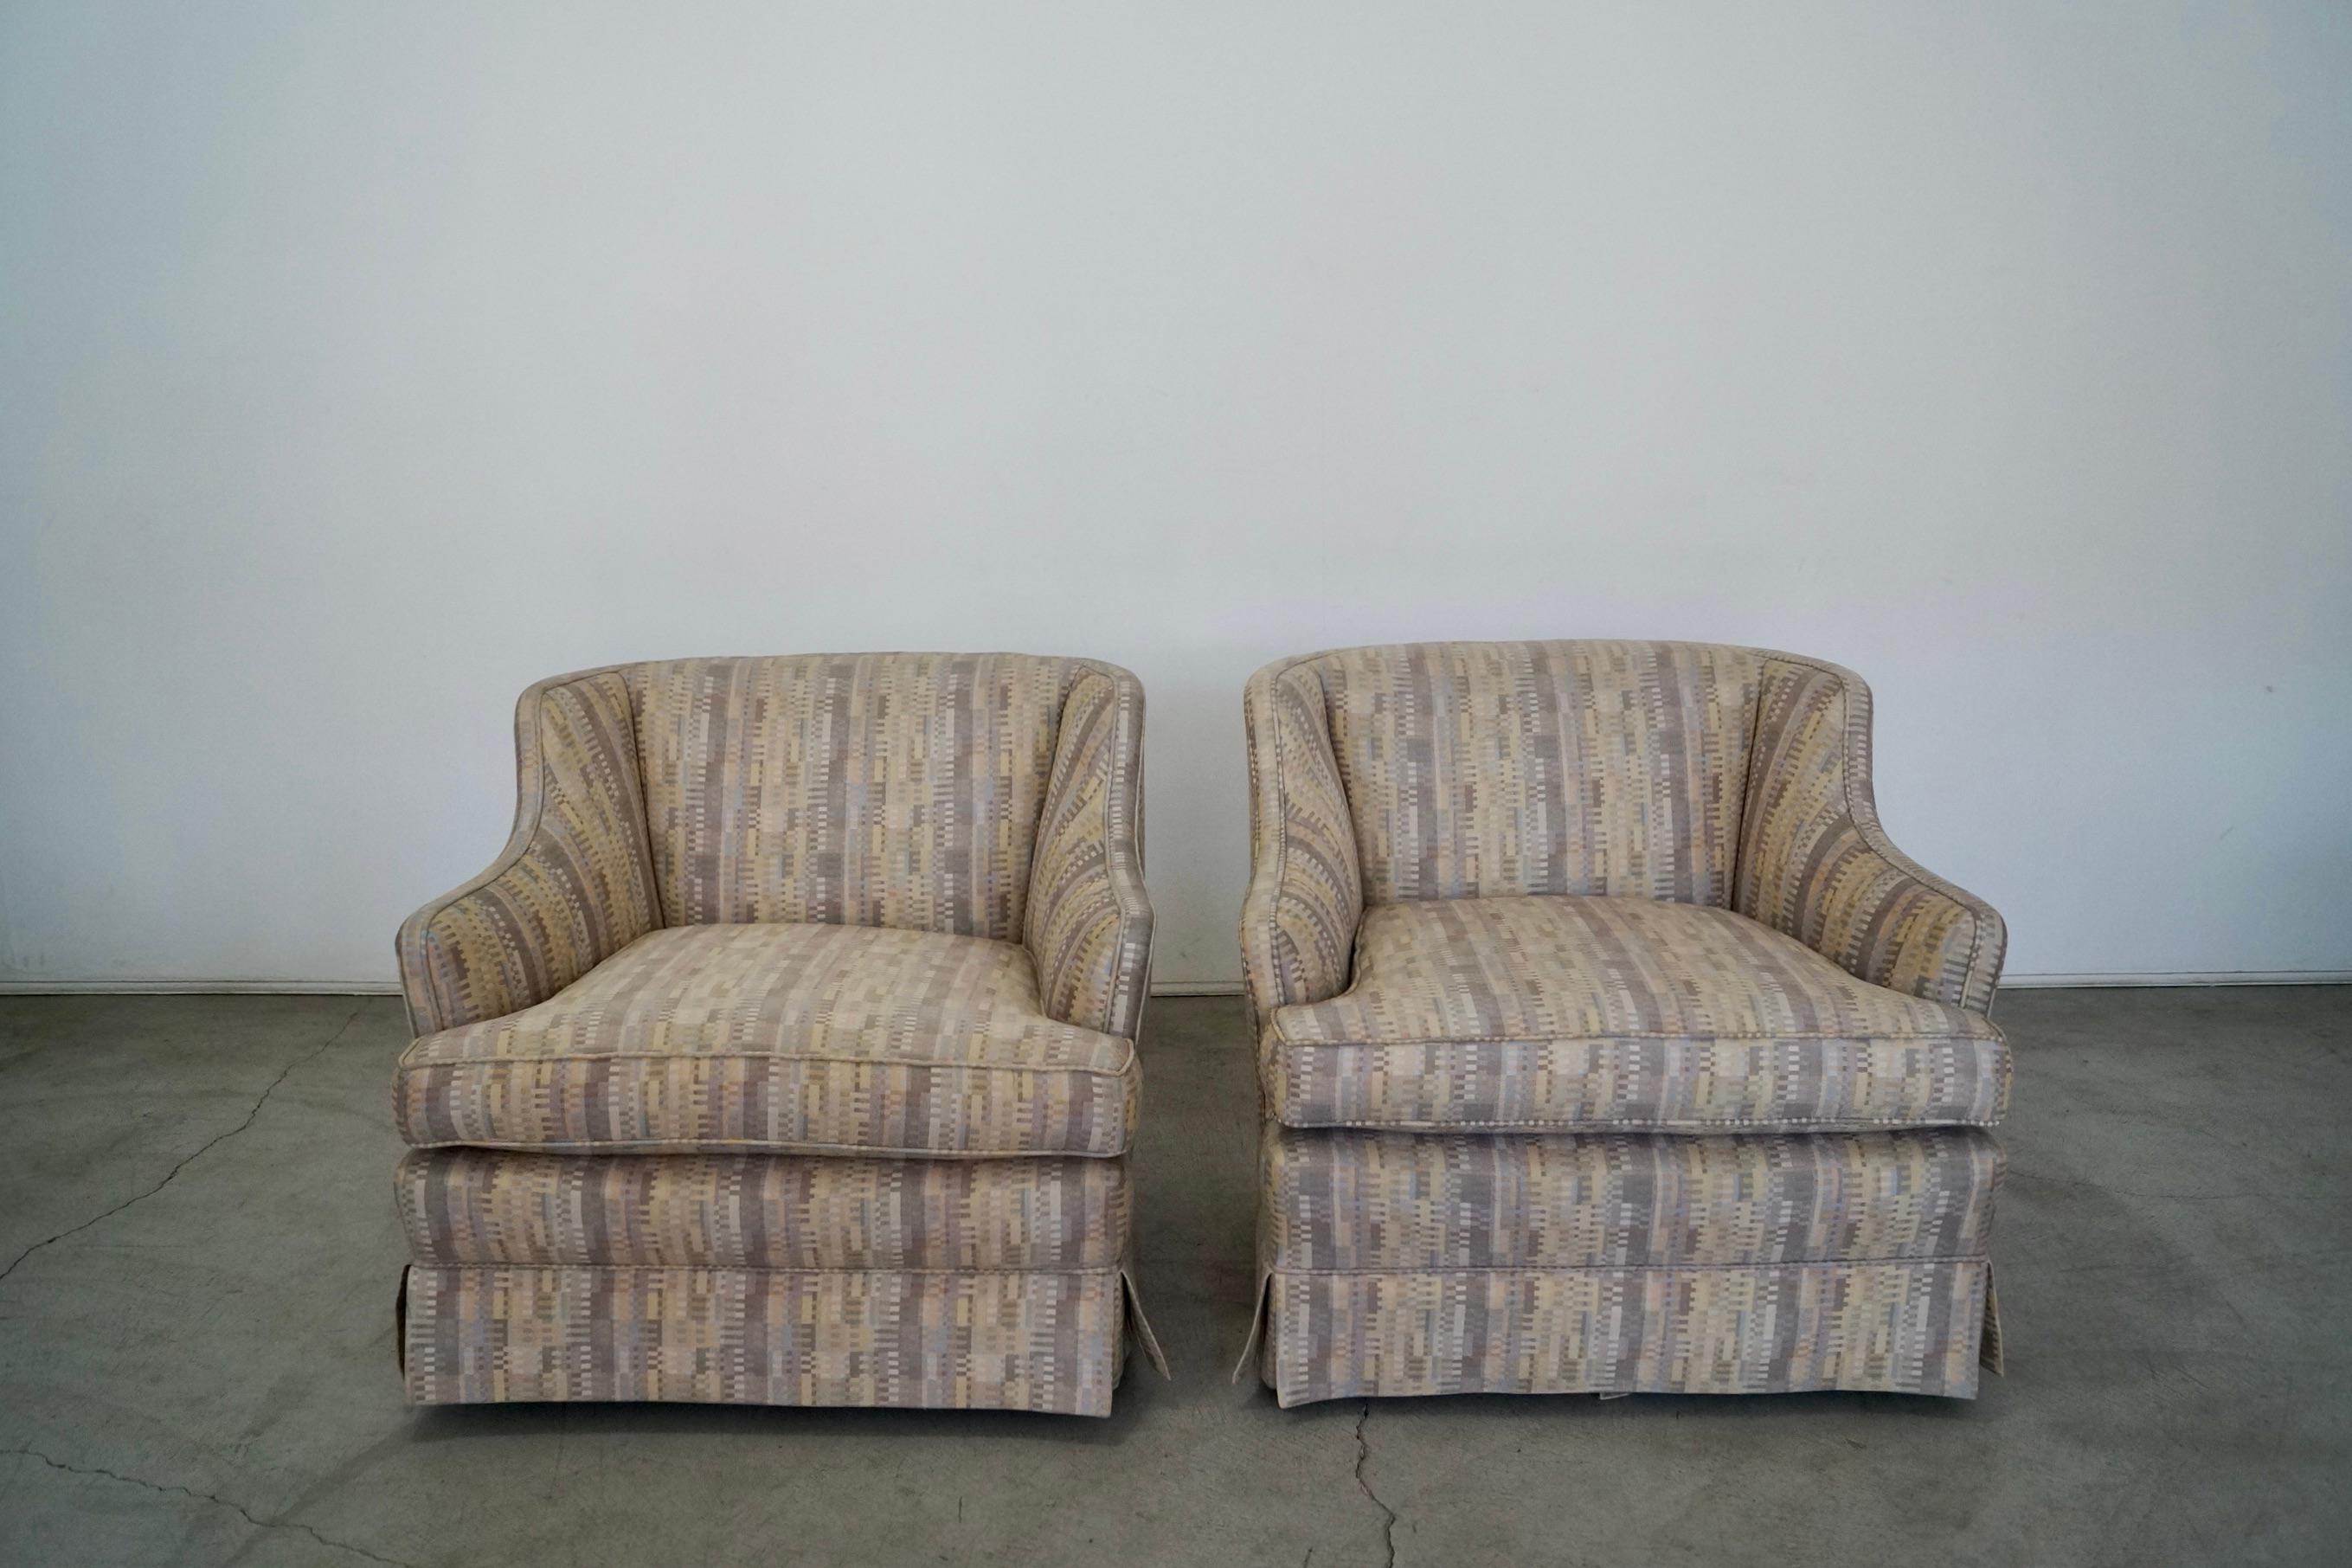 Vintage 1950's pair of lounge chairs for sale. This pair was reupholstered a while back, and is in excellent condition. The fabric has a geometric pattern in muted colors. It has a variation of colors in purple, yellow, blue, white, and gray. These